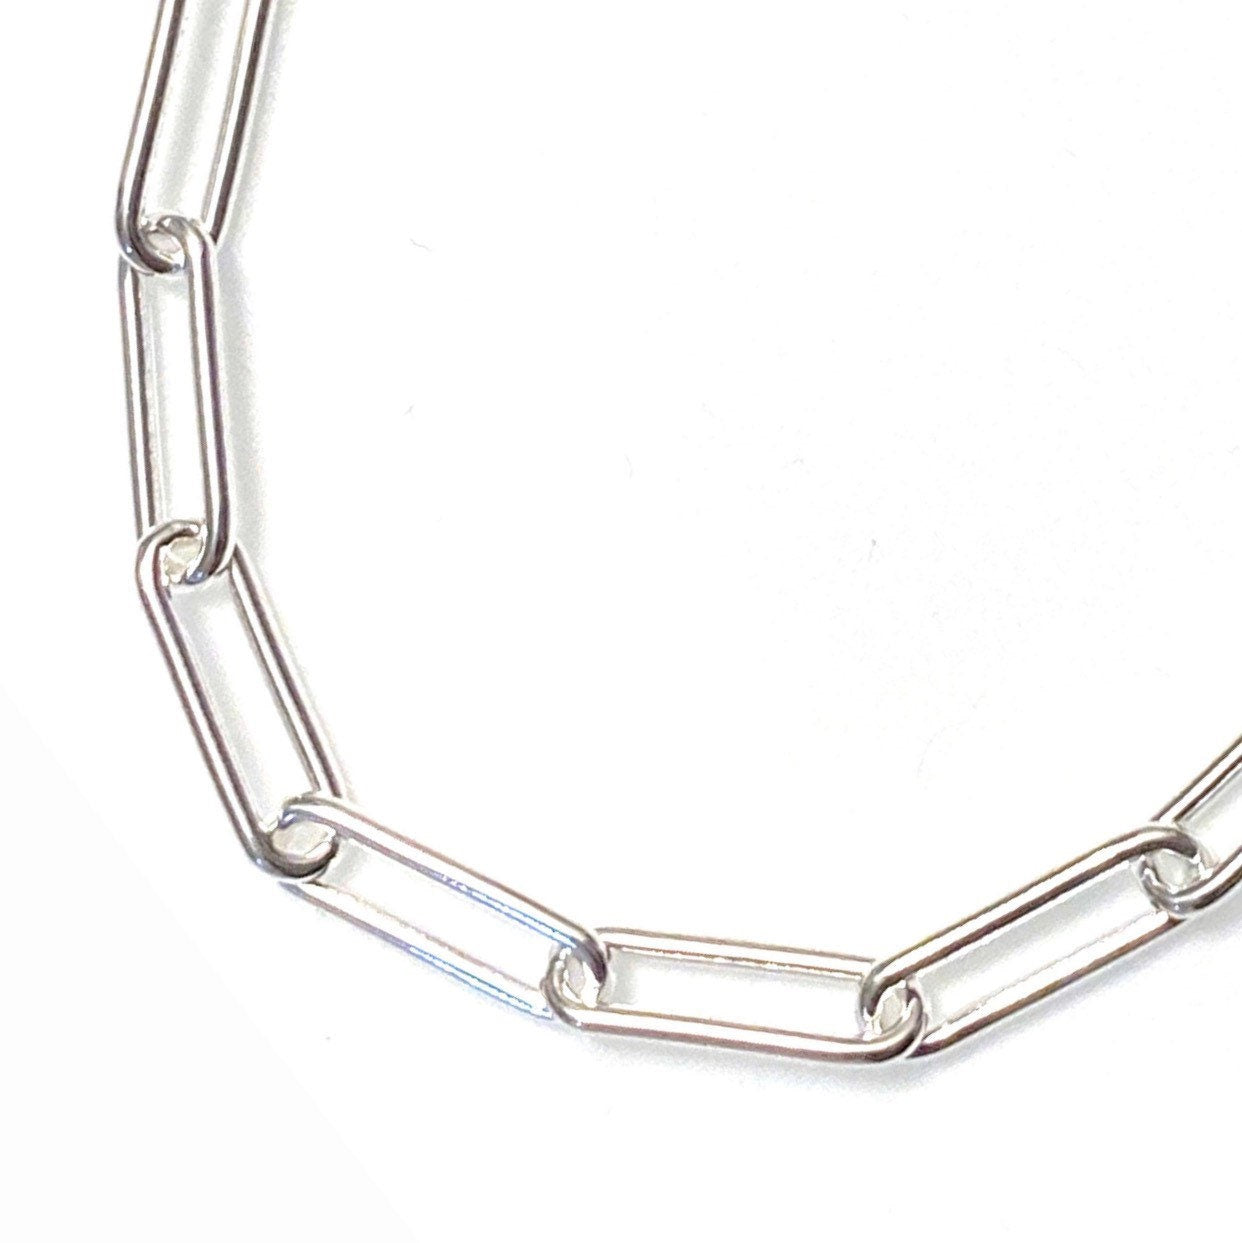 Chunky paperclip chain (shower safe gold plated sterling silver and sterling silver)